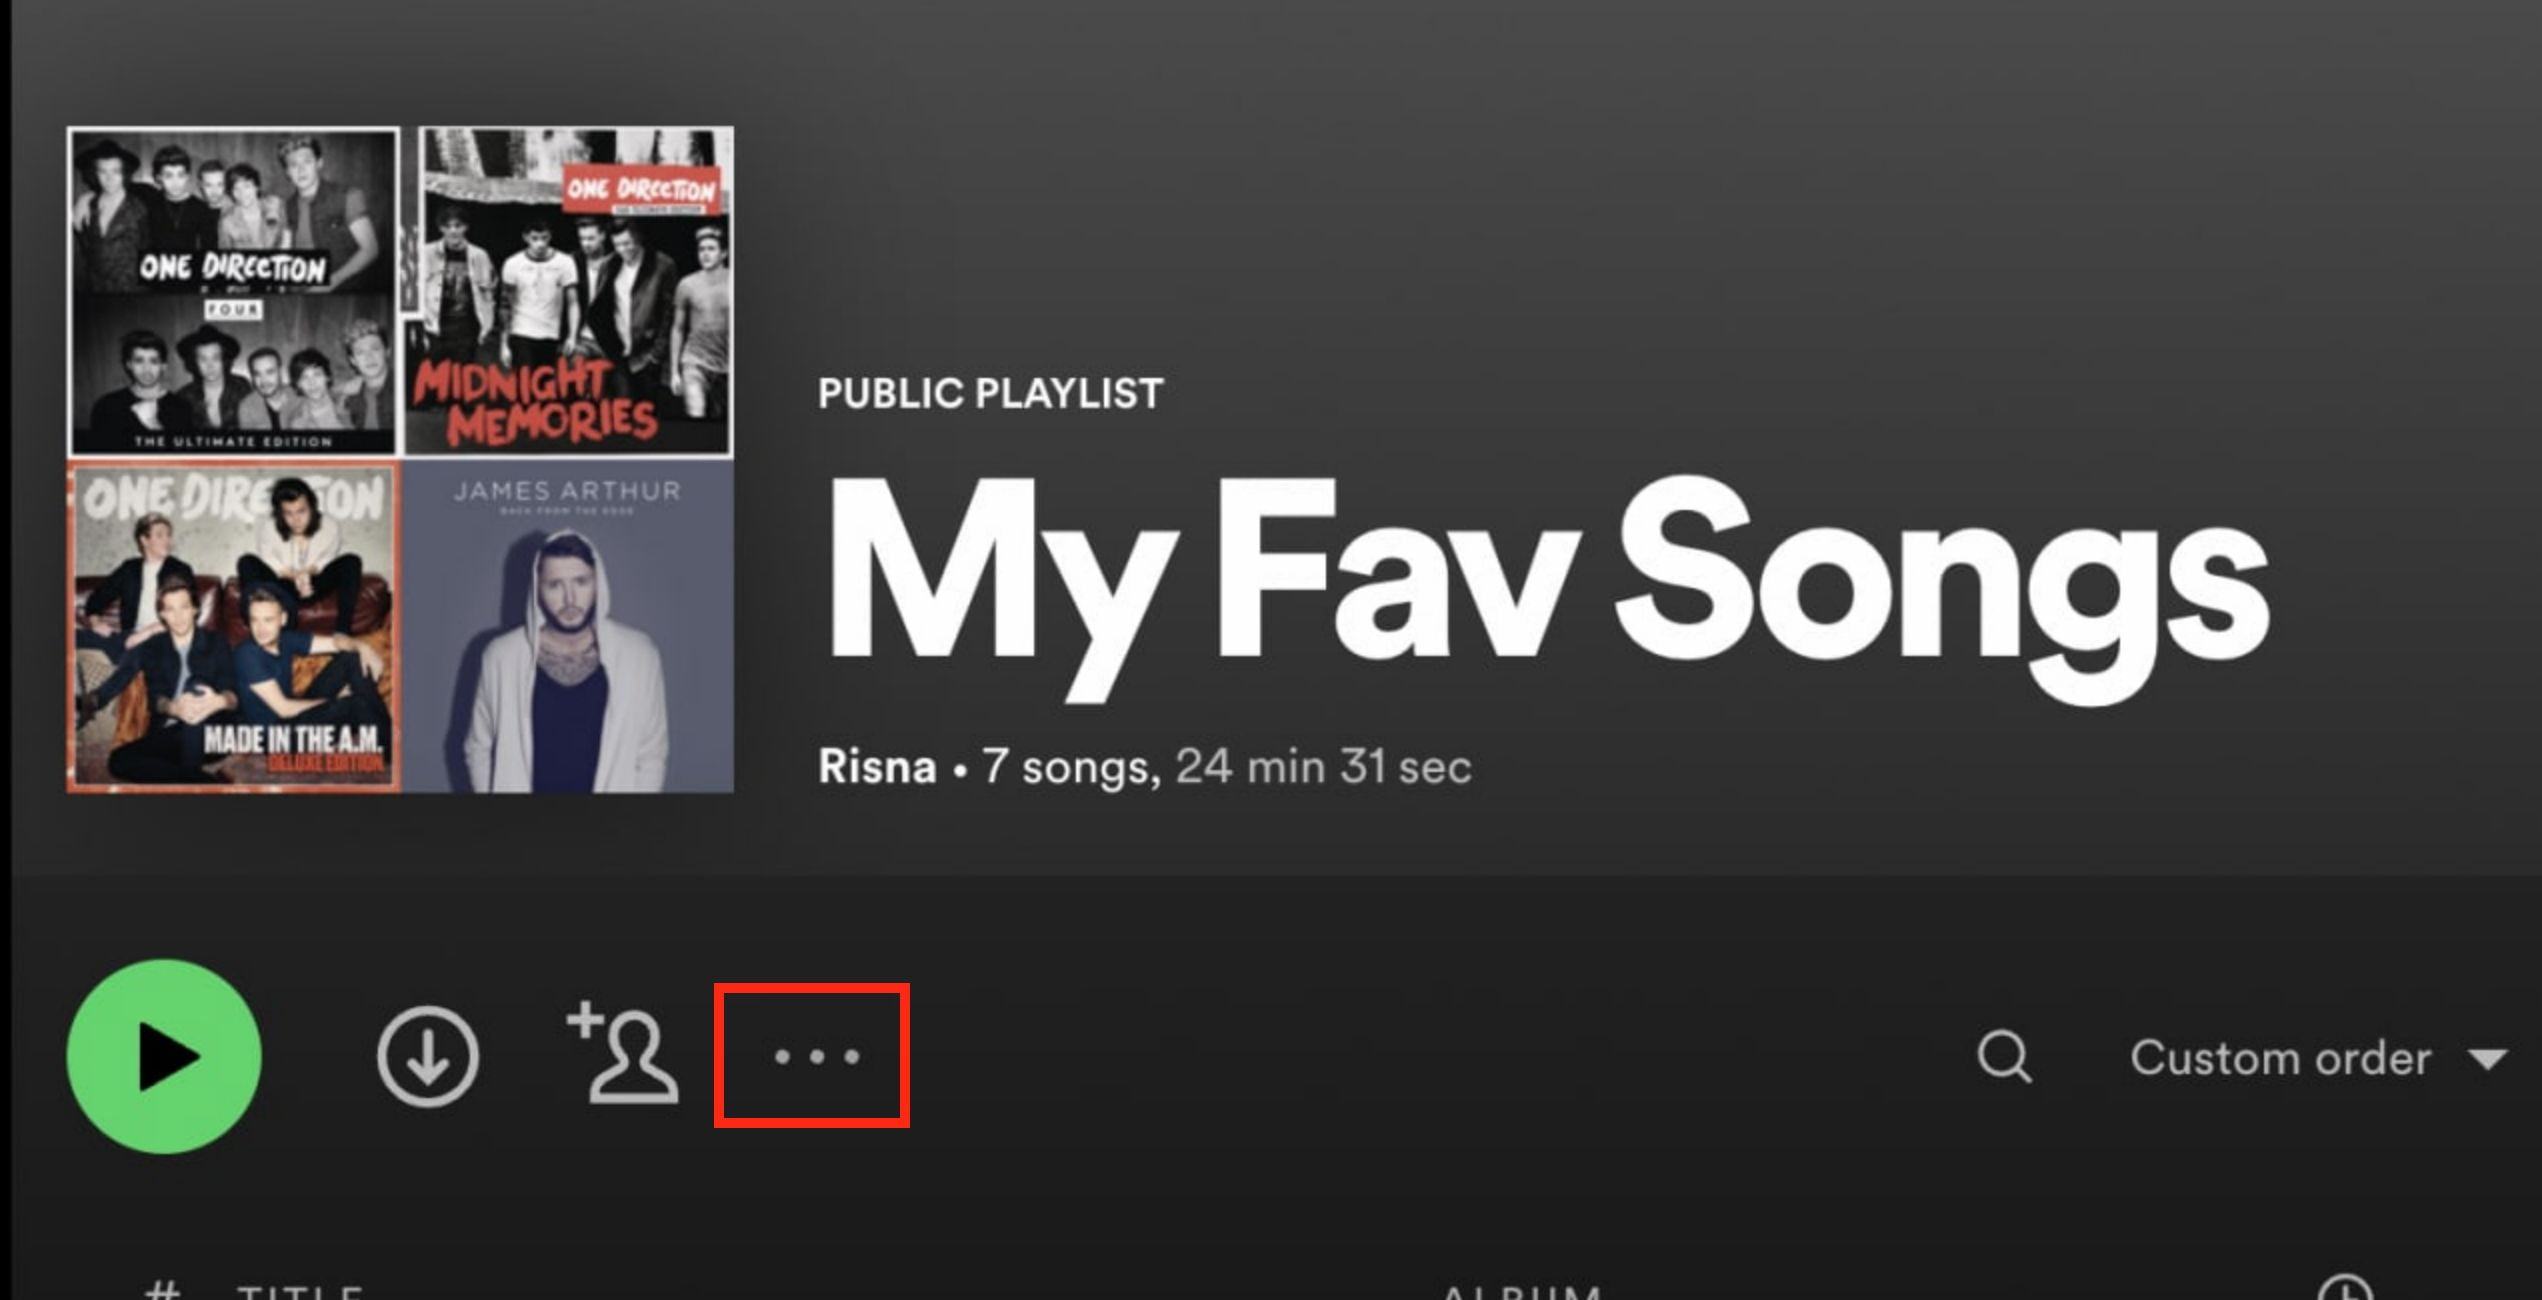 How to Make a Private Playlist on Spotify From Desktop App